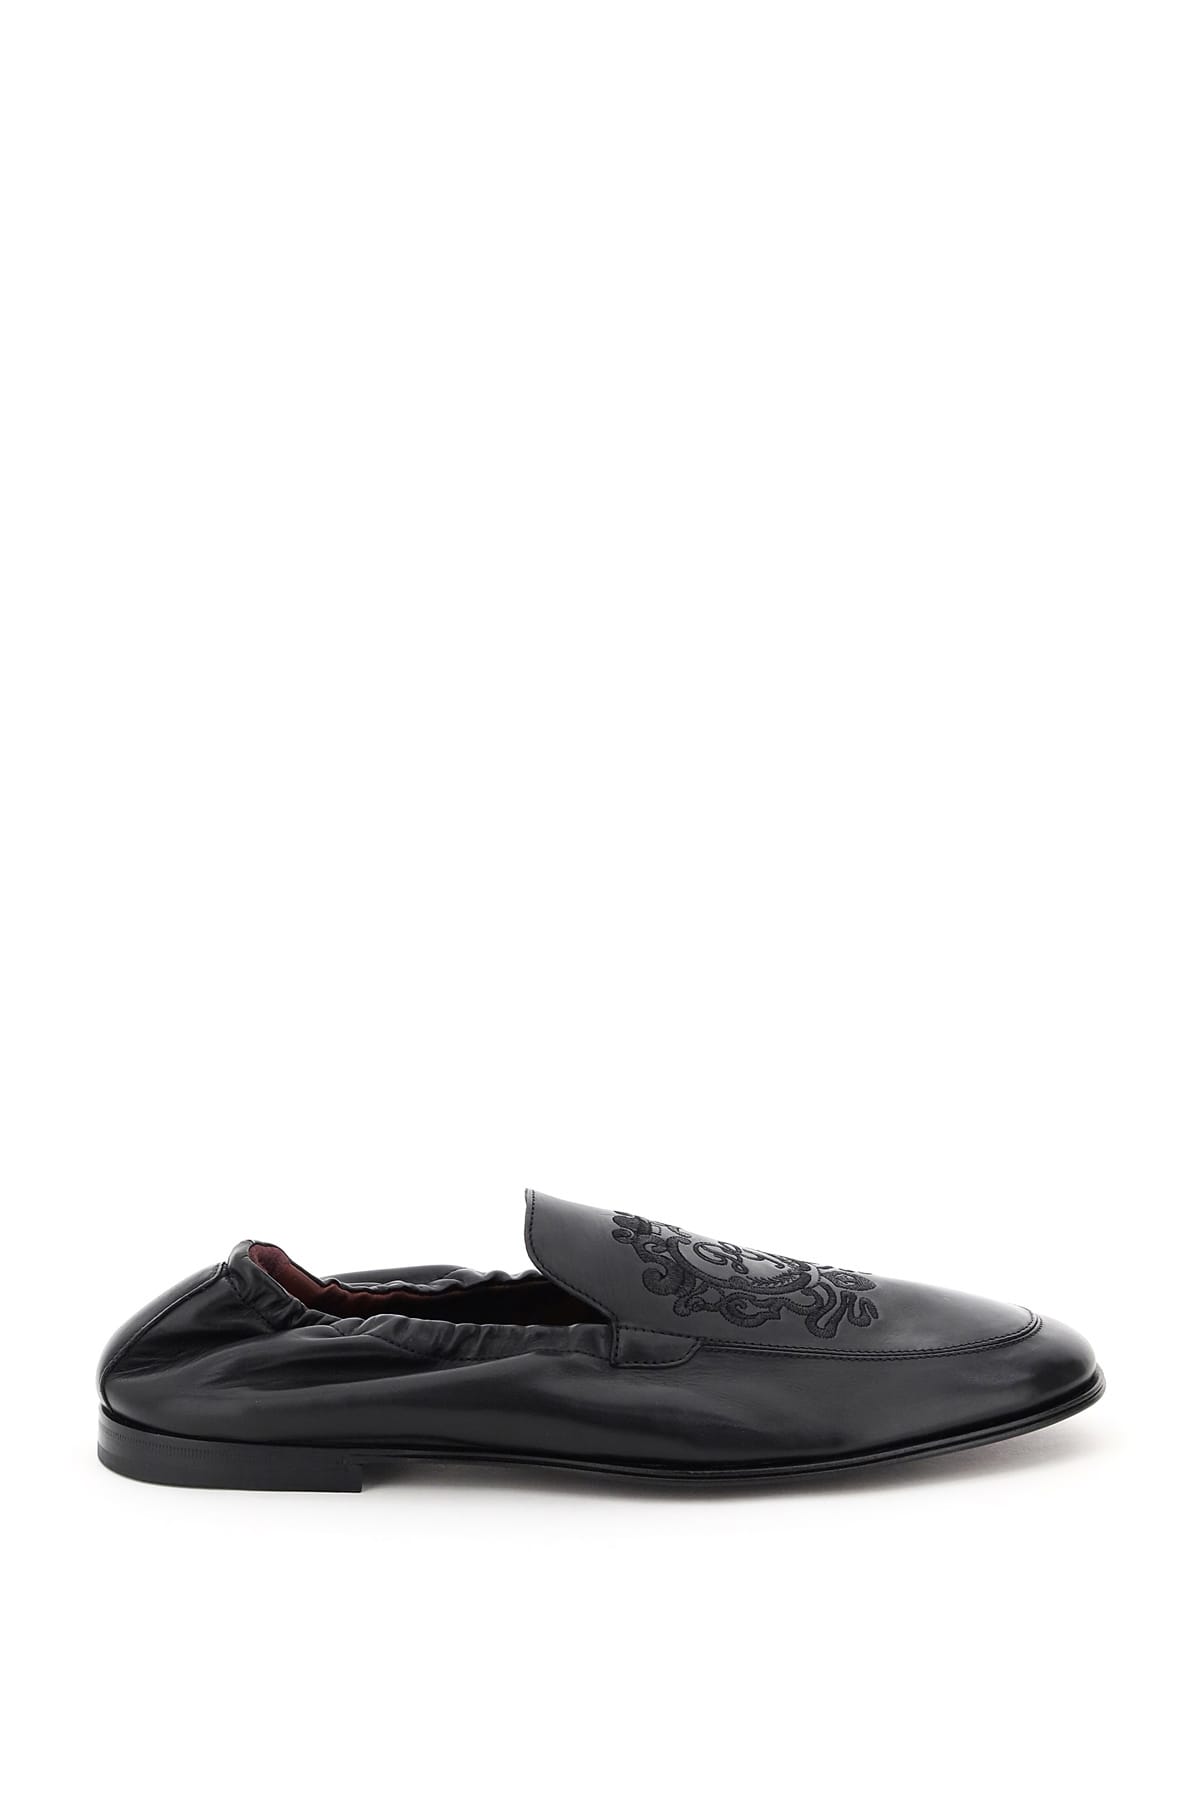 Dolce & Gabbana Ariosto Loafers With Coat Of Arms Embroidery In Nero/nero